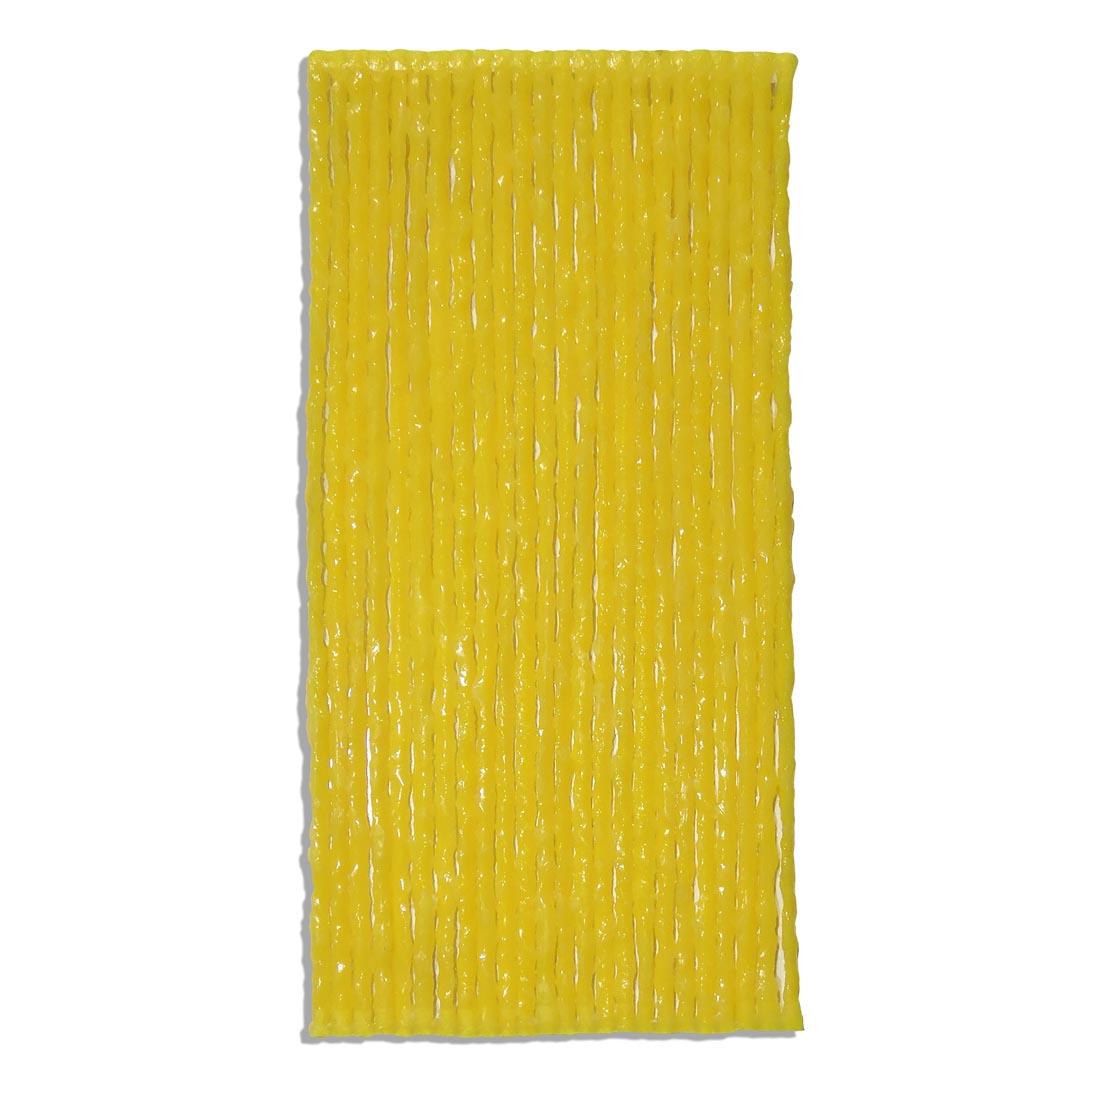 yarn pieces coated with yellow wax